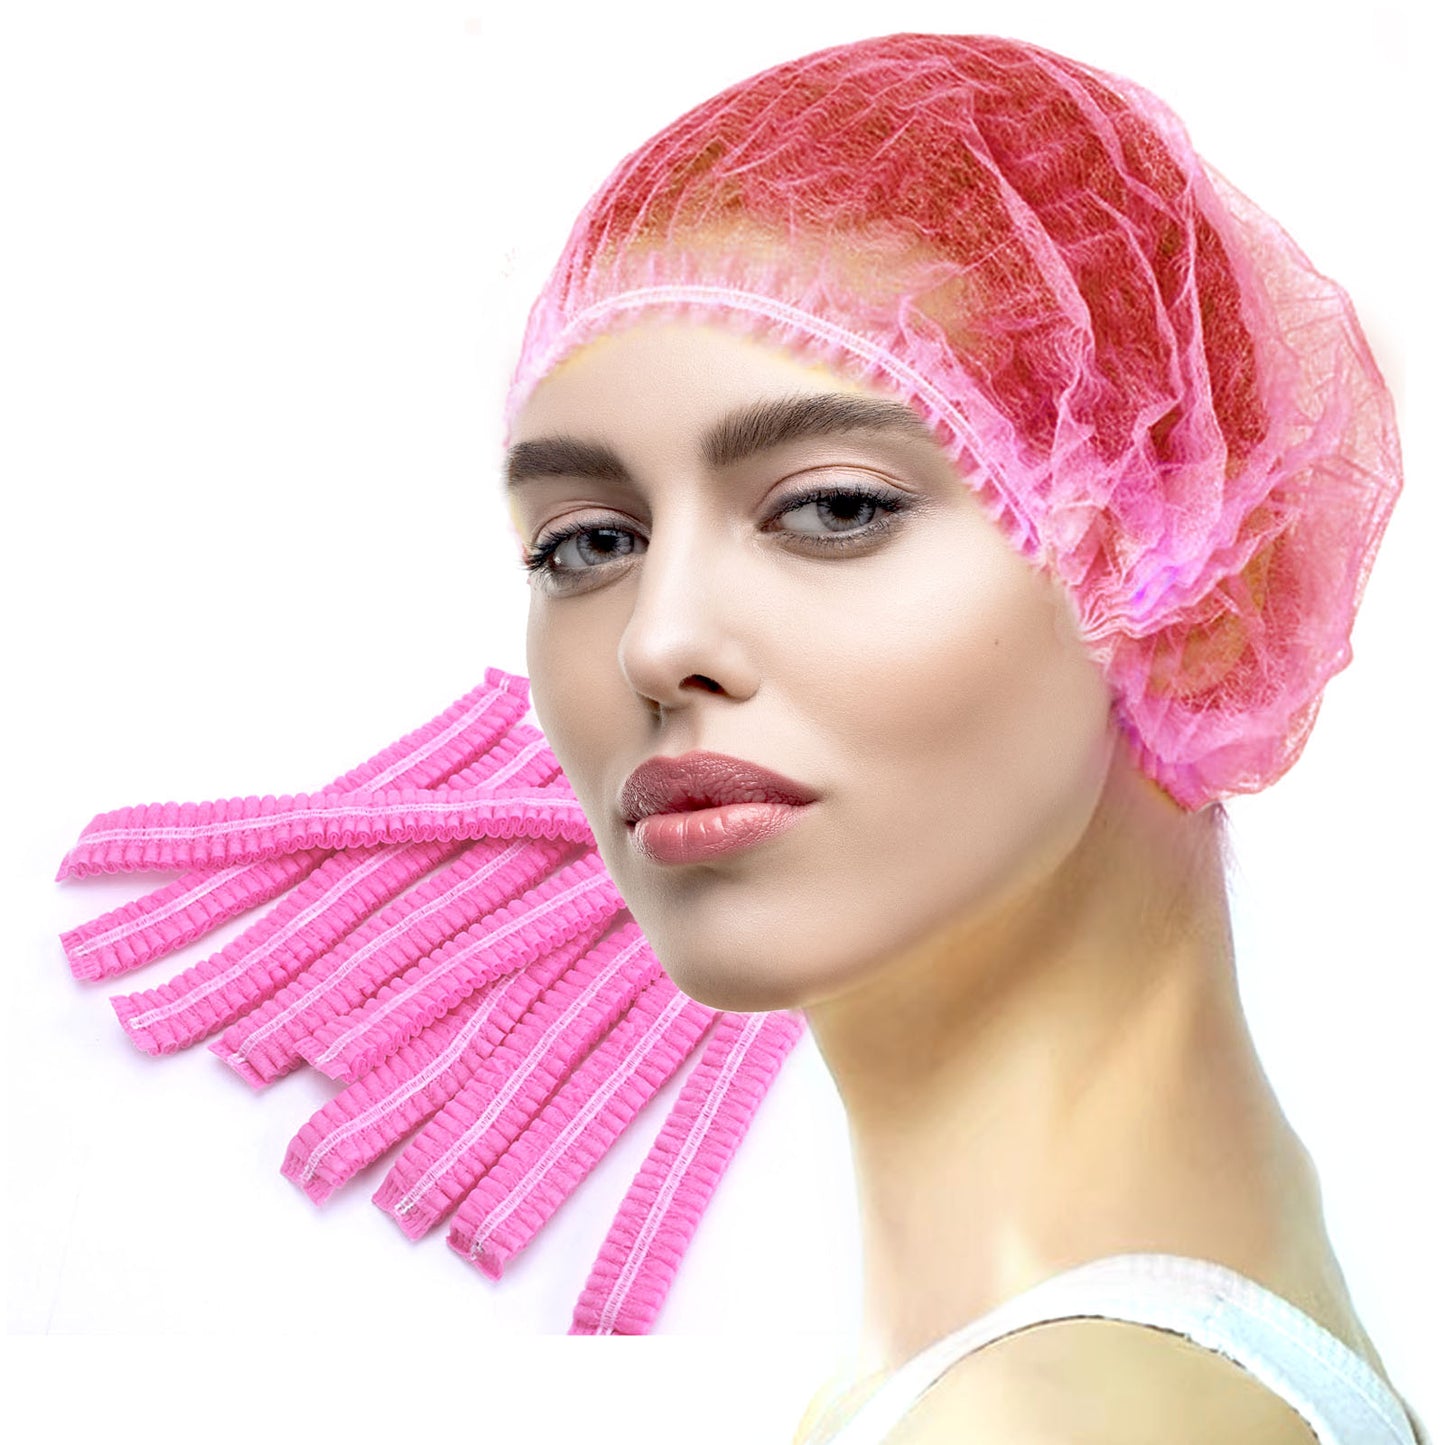 Disposable Non-Woven Hairnets, Bouffant Caps, Protective Hair Head Covers, Hair Net, Surgical Cap, Medical Hair Covers